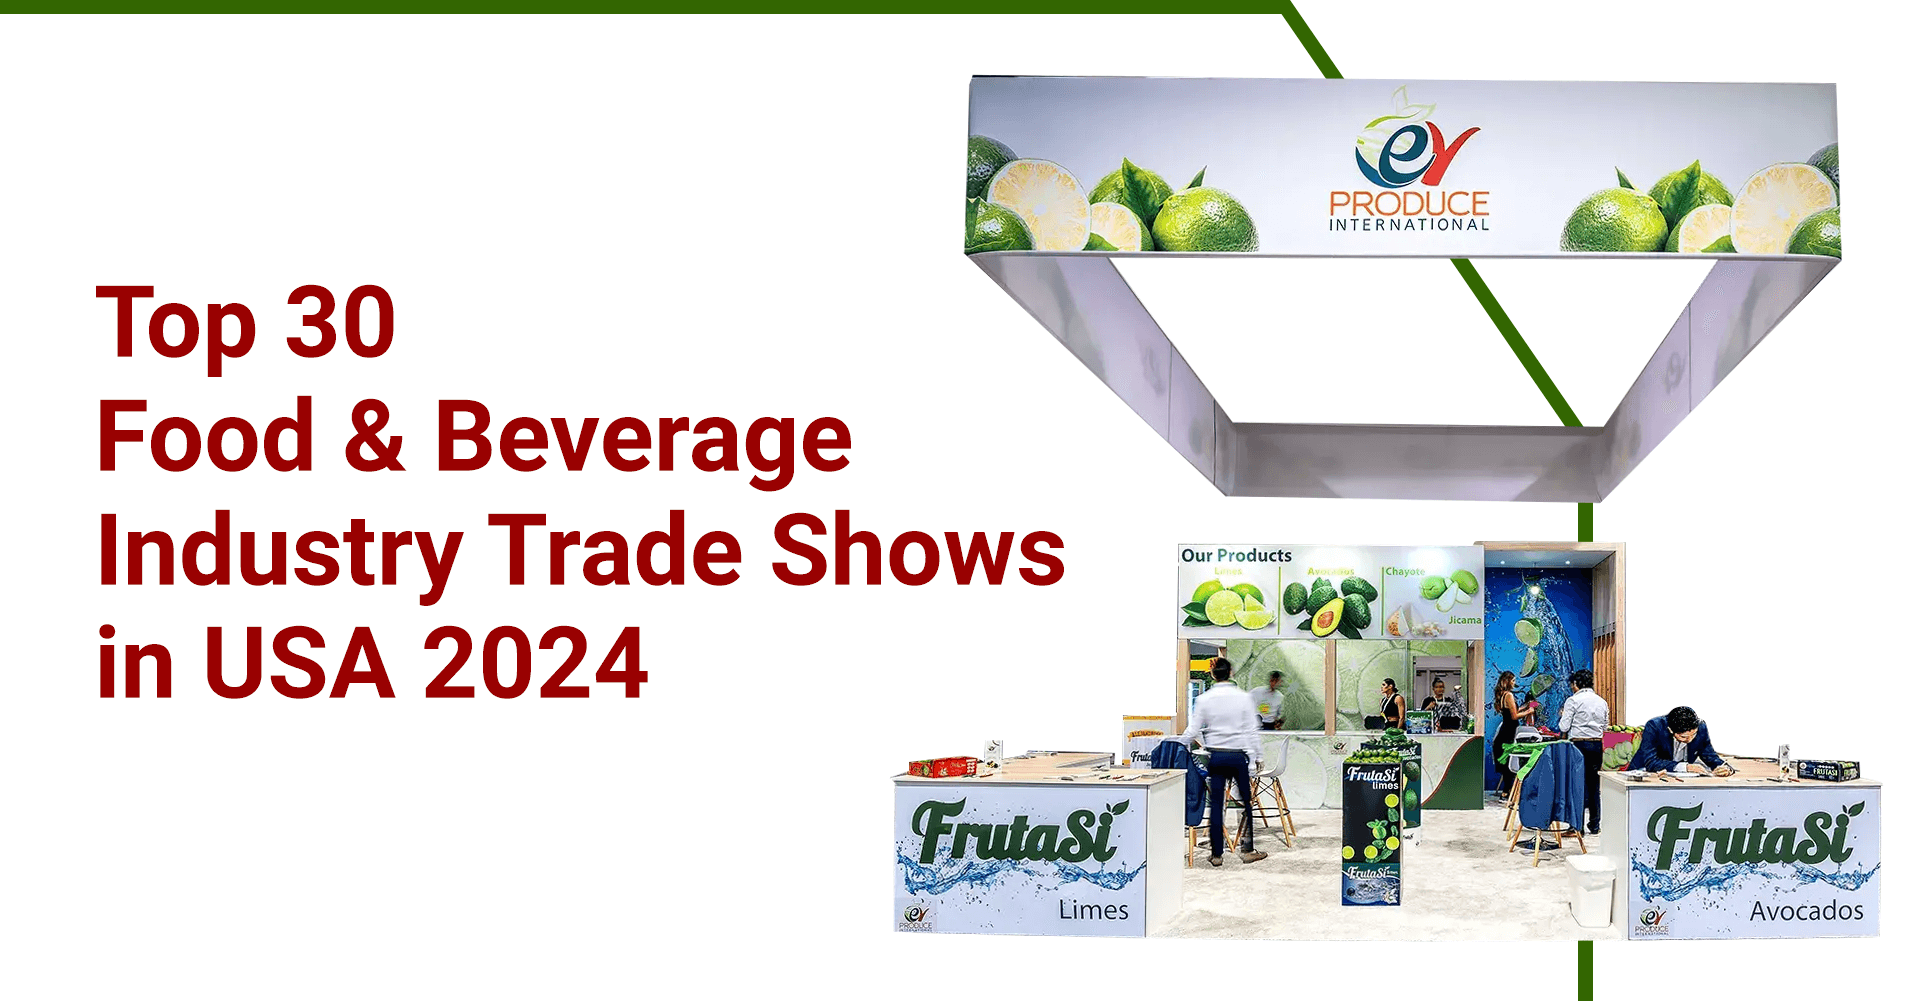 Top 30 Food and Beverage Trade Shows in the USA for 2024